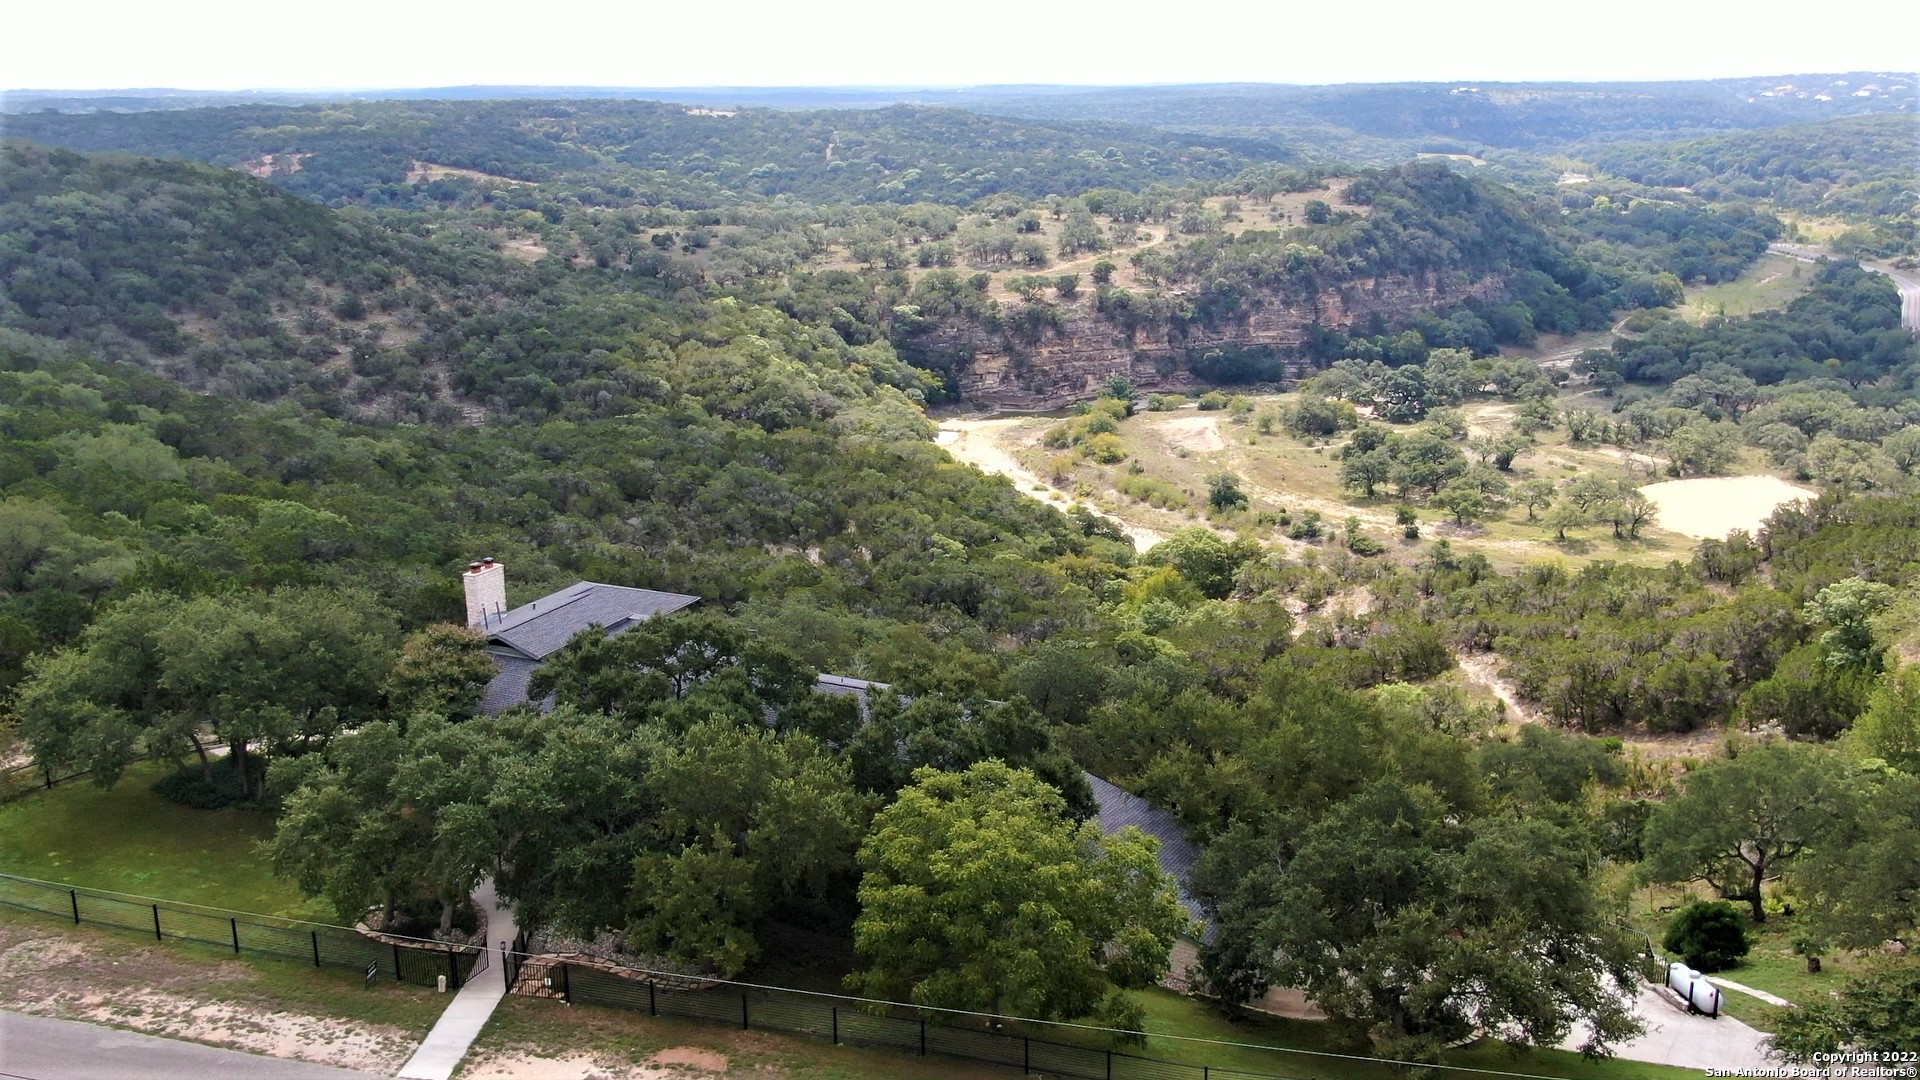 Contemporary Hill Country Masterpiece! This custom home designed by Award Winning Austin Archcitect, Tim Cuppett, captivates with an understated, sexy sophistication. The refined, timeless style is well-executed to complement, and not compete against the alluring outdoor elements, overlooking the Cibolo Creek and Canyon. Upon first step into the foyer, the soaring ceiling, brilliant architectural design and gorgeous hardwood maple flooring create an instant WOW factor. And, let's talk about the aesthetic charm of all the wood-framed windows!!! The split-level layout allows for opportunities to enjoy the beautiful hill country from almost every room! The great room includes a full limestone wall & fireplace with space for several conversation areas. The dining room is open to encourage a relaxed & enjoyable ambiance. The sleek galley kitchen boasts long granite counters, 2 sinks, stainless appliances including a Thermador 6-burner gas range with convection oven. The master suite features a gas fireplace, full bathroom, walk-in closet & private balcony. The office possesses a lofty vibe, complete with built-ins, a corner window reading nook & is conveniently located near the master suite. The secondary bedrooms, bathrooms & living room can be found tucked away on other levels. The multi-tiered, hillside decks provide plenty of spots for coffee at sunrise, yoga, dinners al fresco & shaded evenings with drinks & entertaining. I dare you to find a spot that doesn't provide you with incredible, breath-taking views of the canyon! This gated property is near the end of a cul-de-sac, feeling hidden & private. No city taxes! Conveniently located between New Braunfels, San Antonio and Boerne.